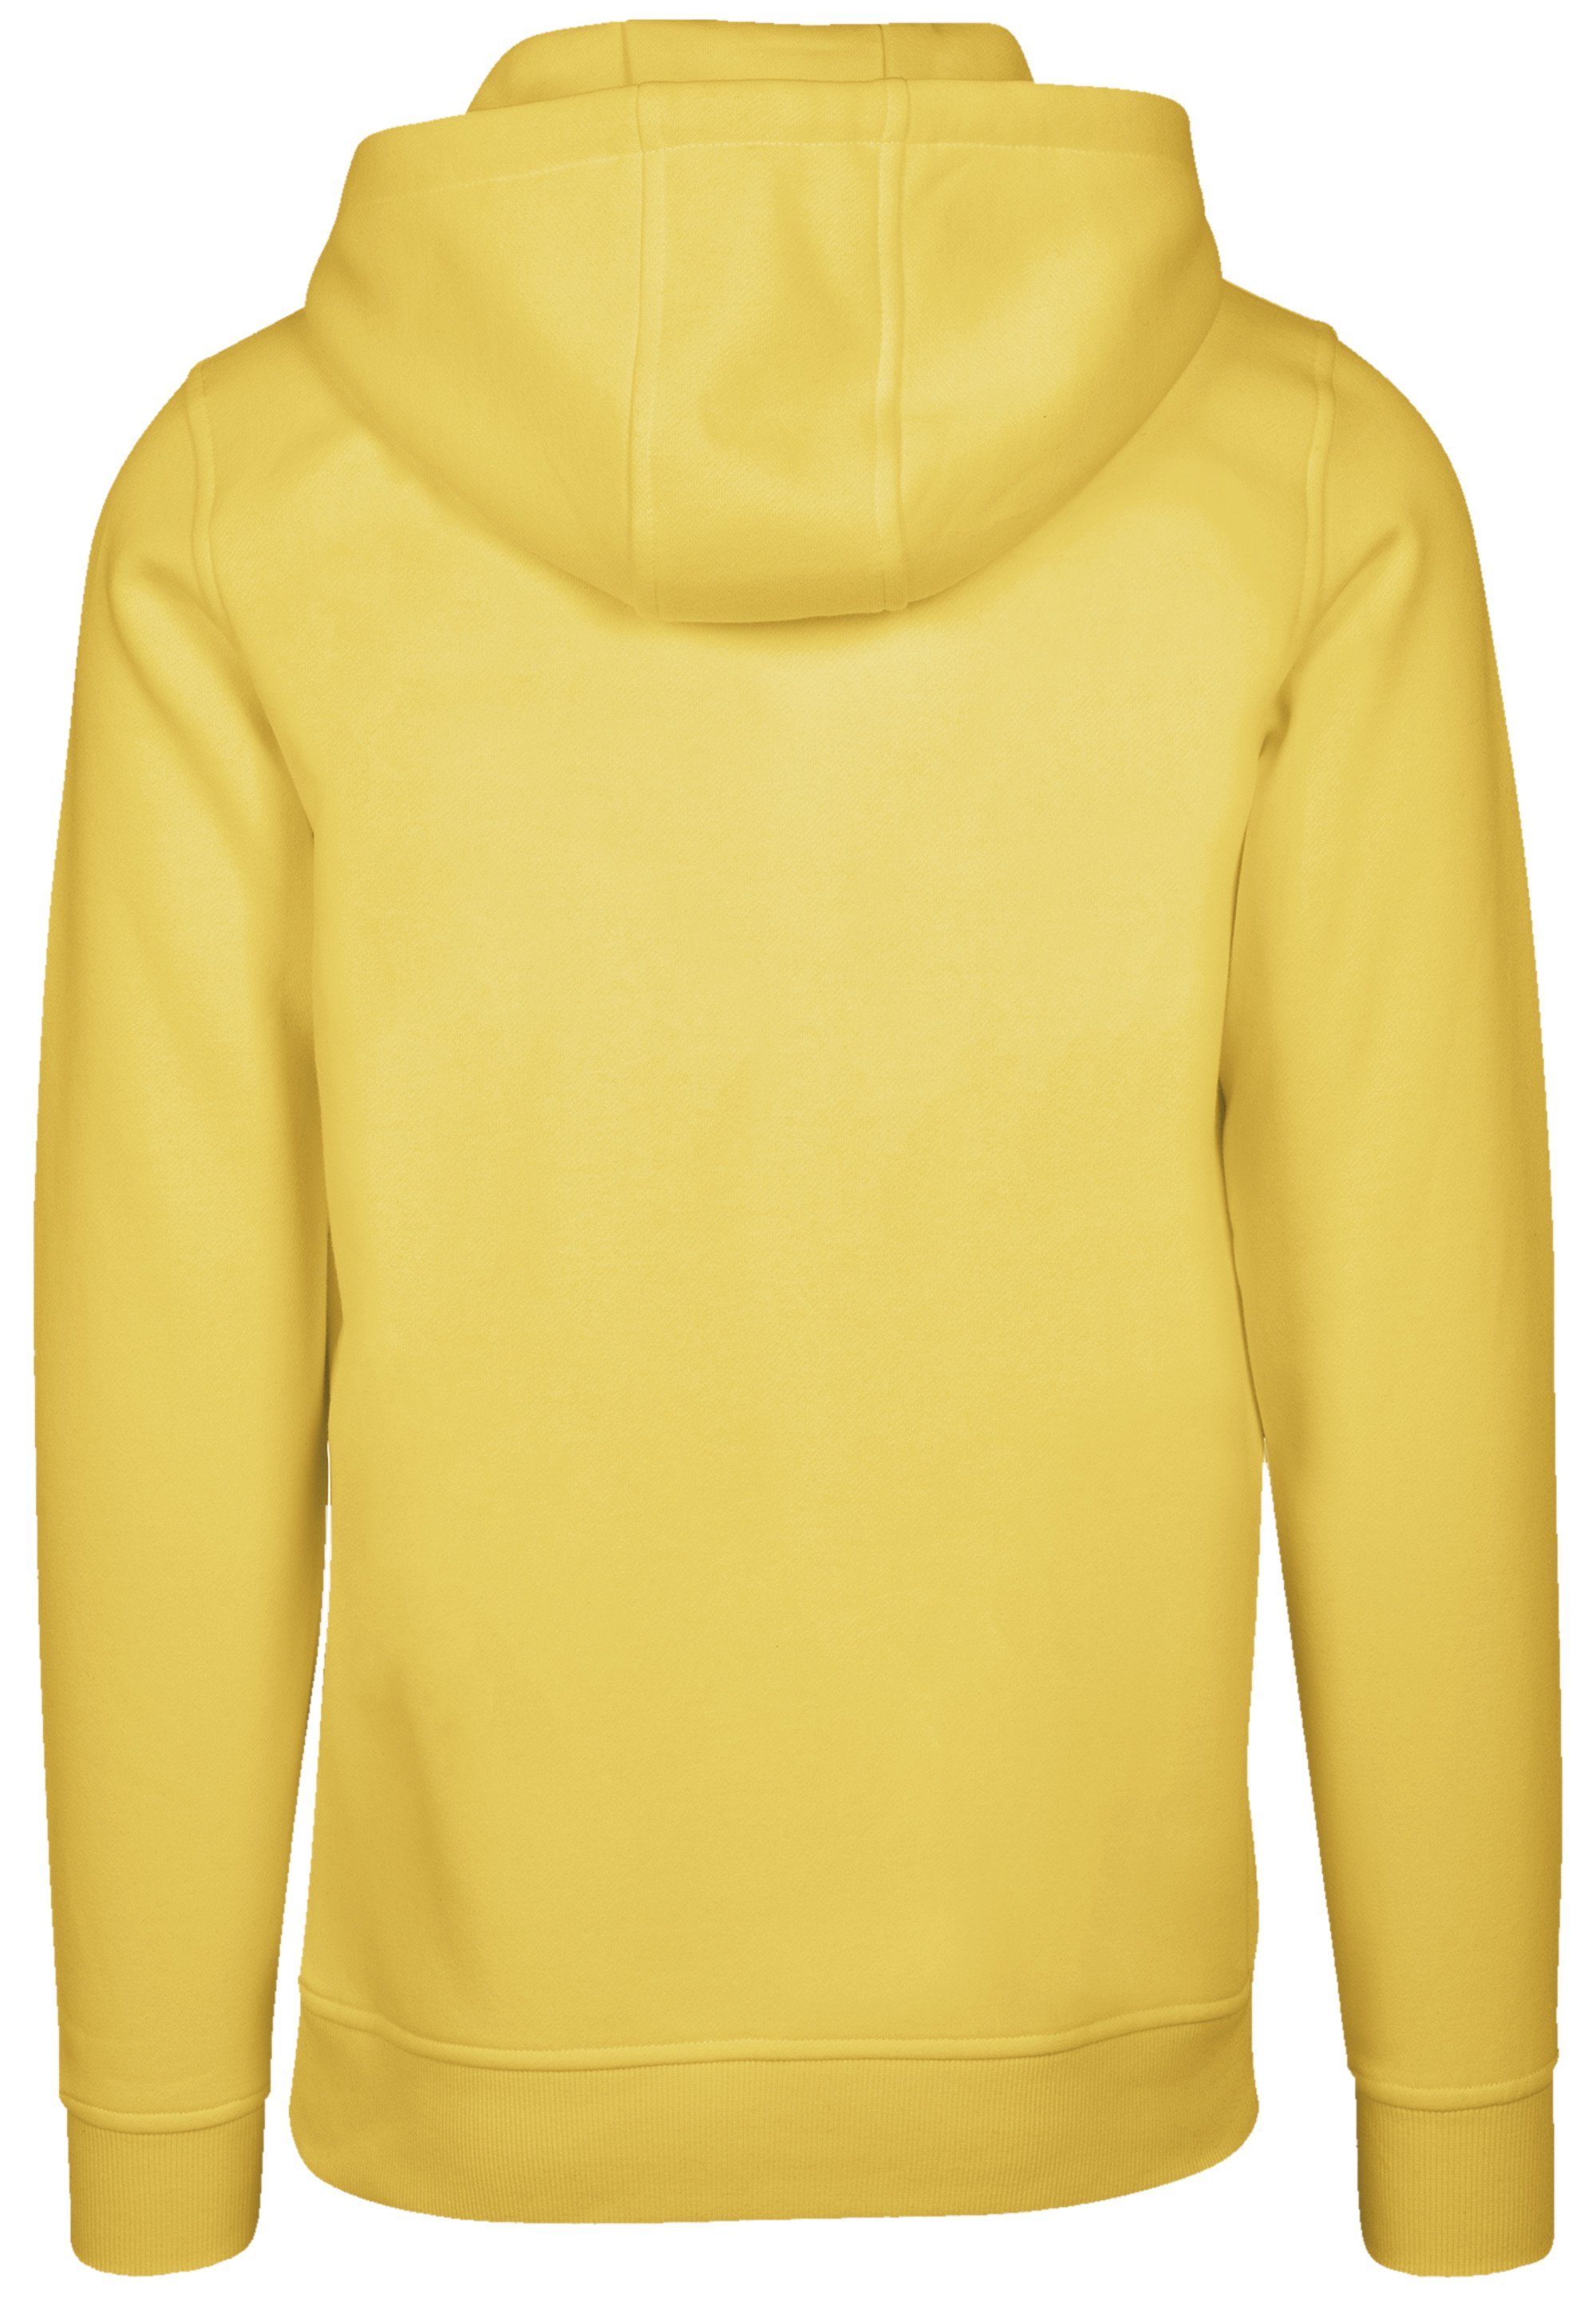 yellow Hoodie, Warm, Bequem taxi Discover Kapuzenpullover F4NT4STIC world the